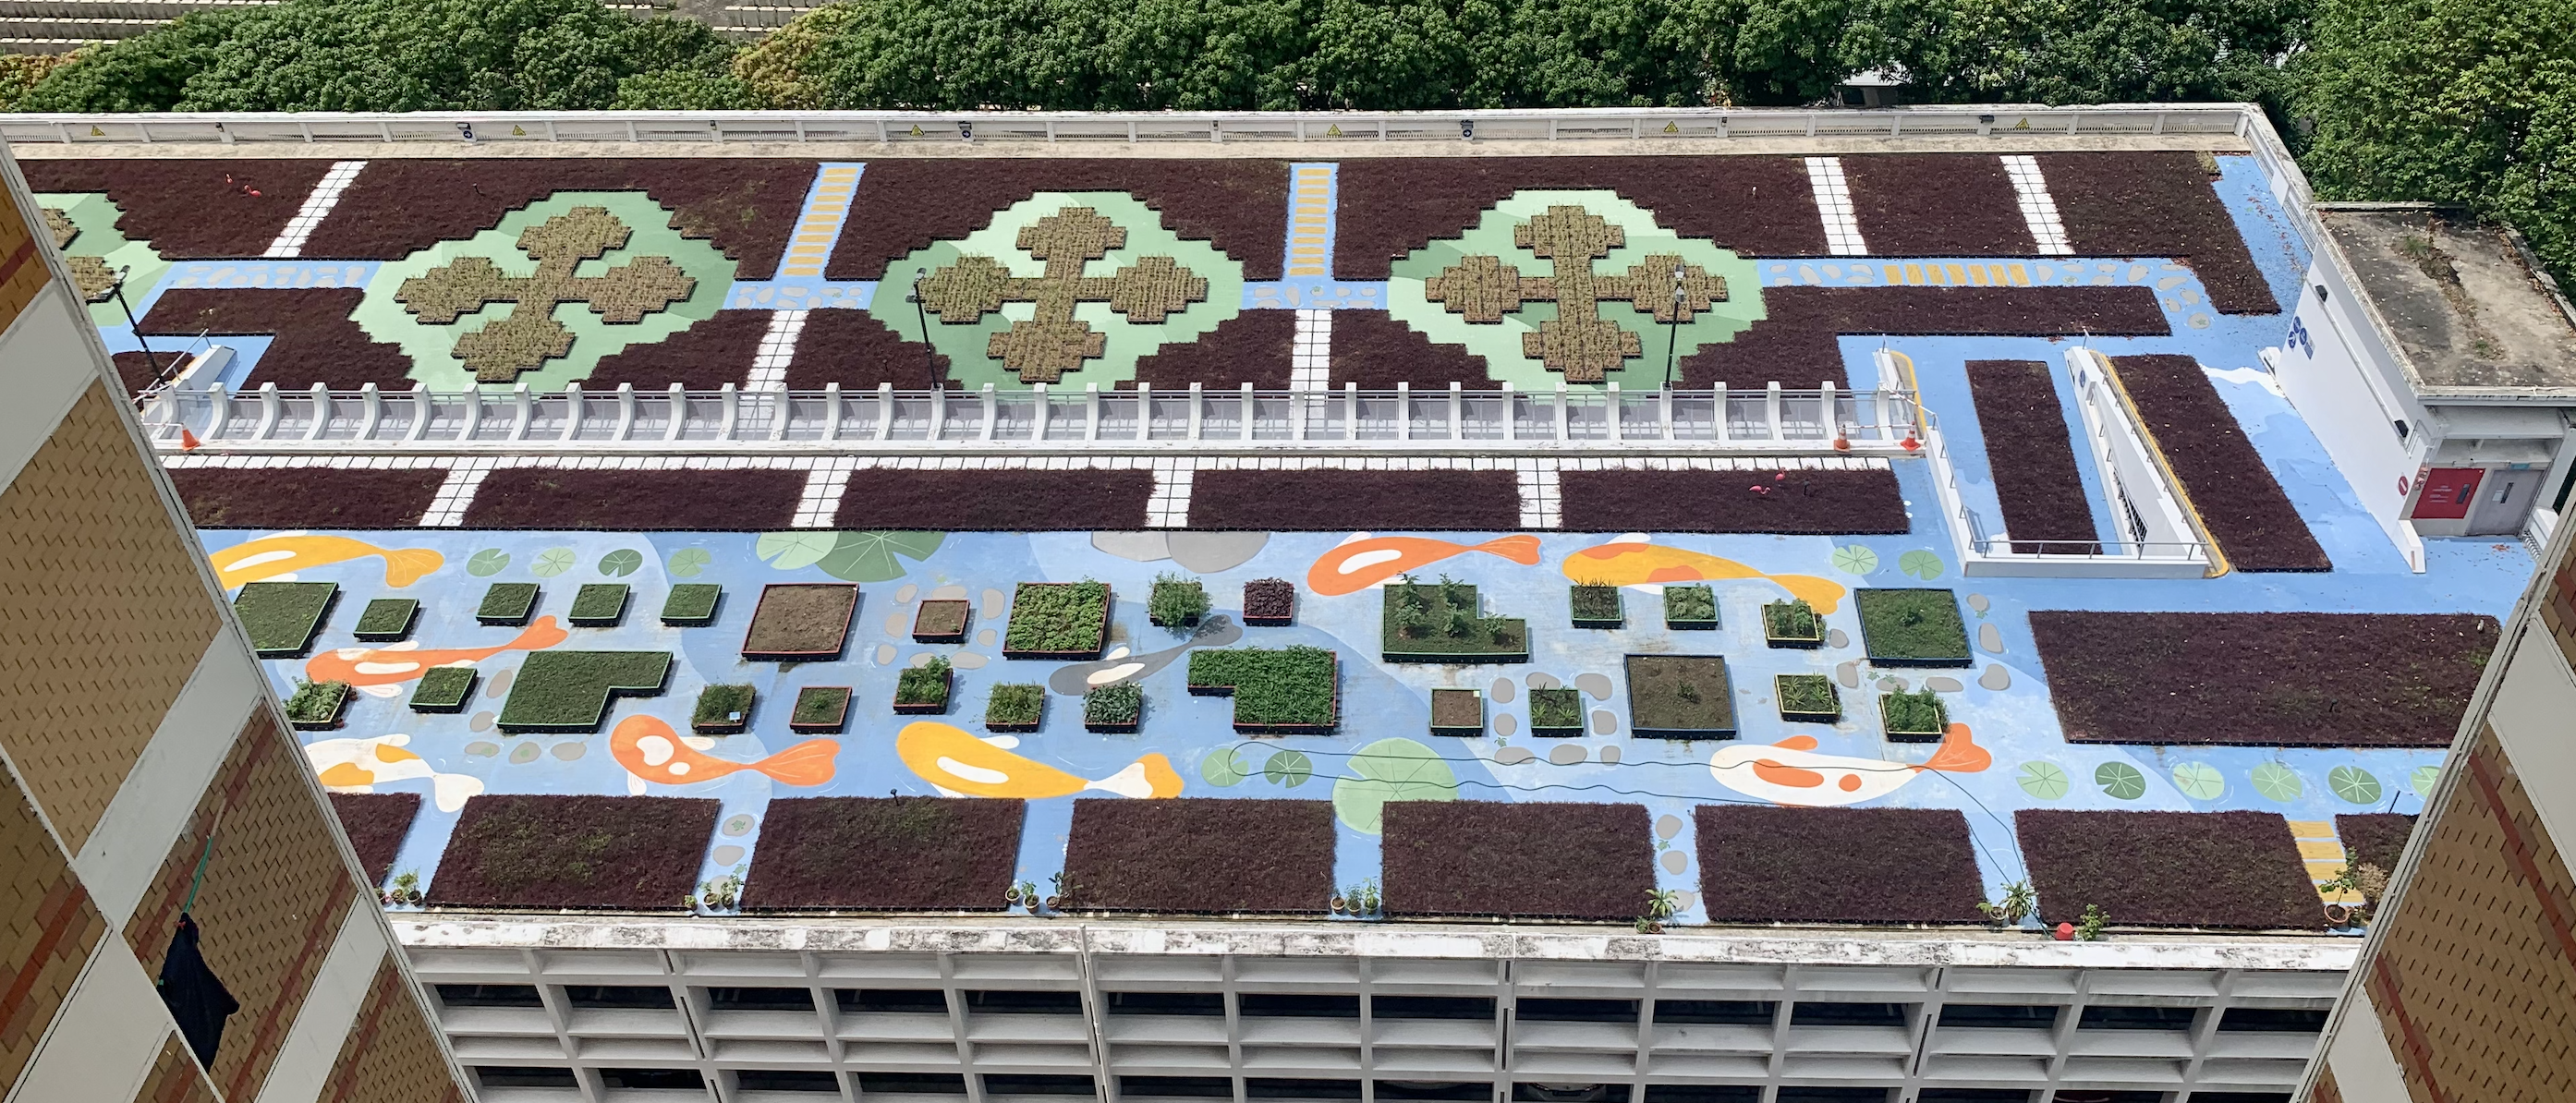 View of the rooftop art display from above